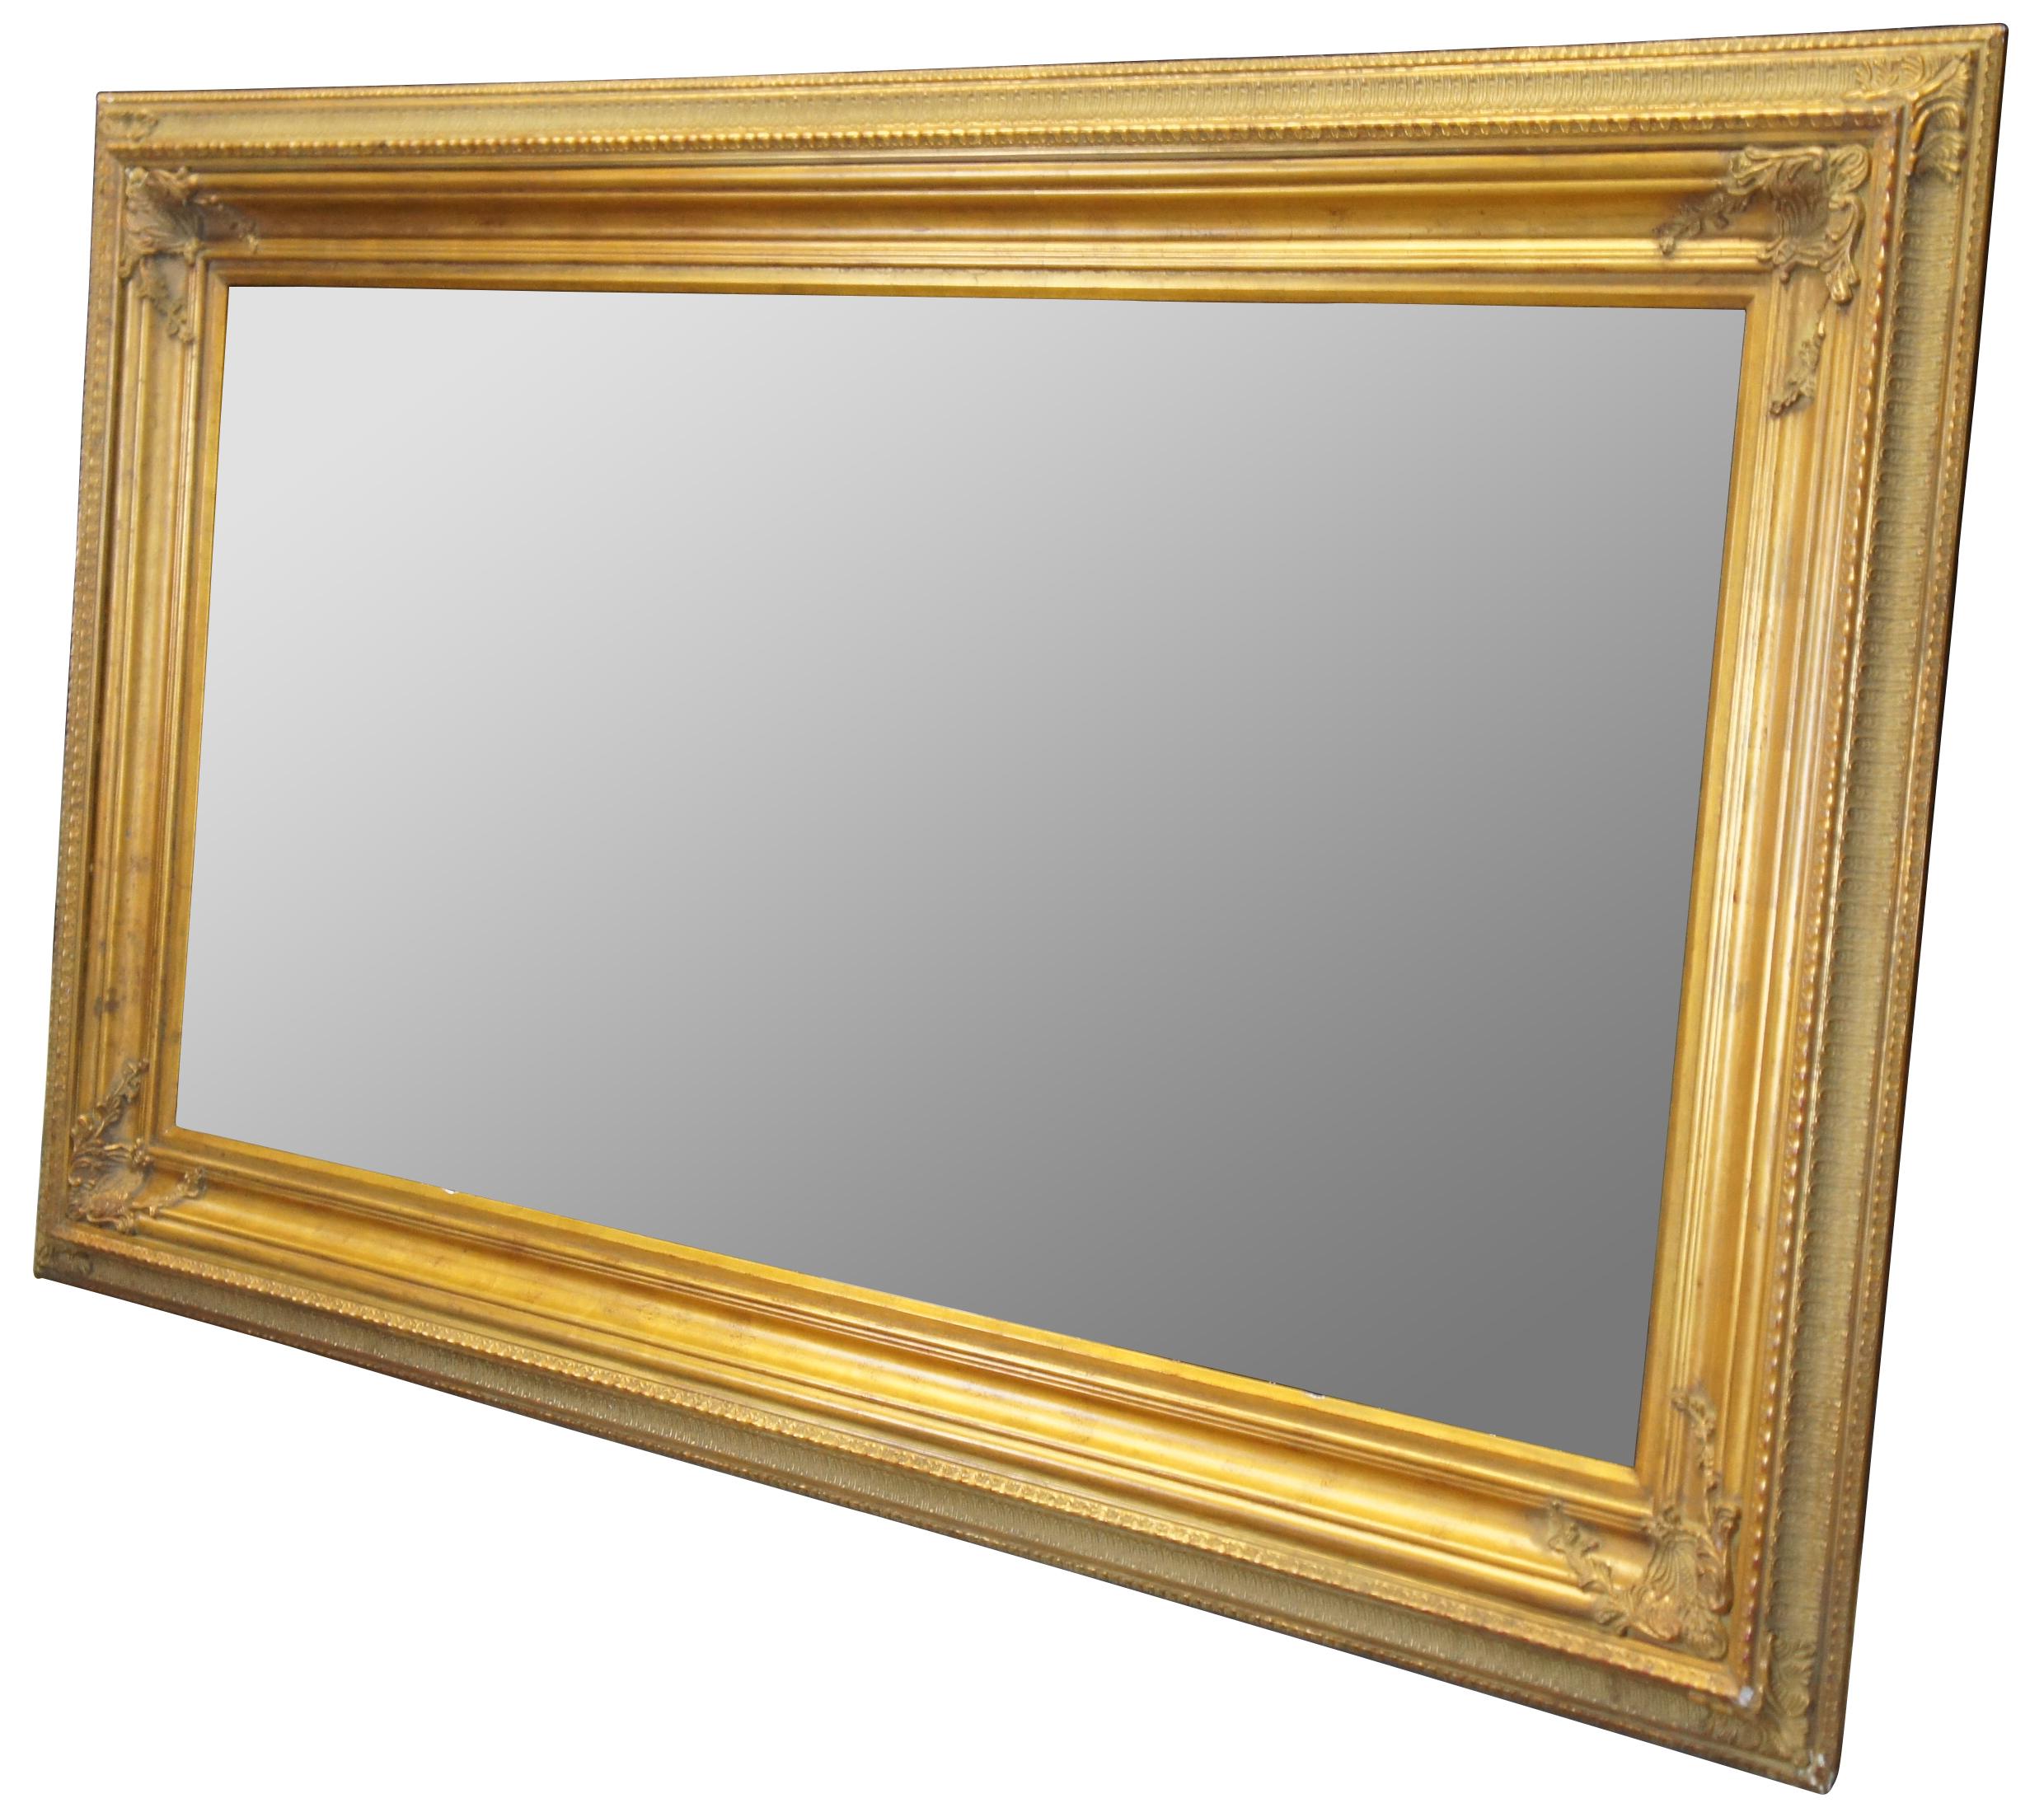 Vintage ornate gold frame. Made of wood with acanthus design and red undertone.

Measures: Opening 36